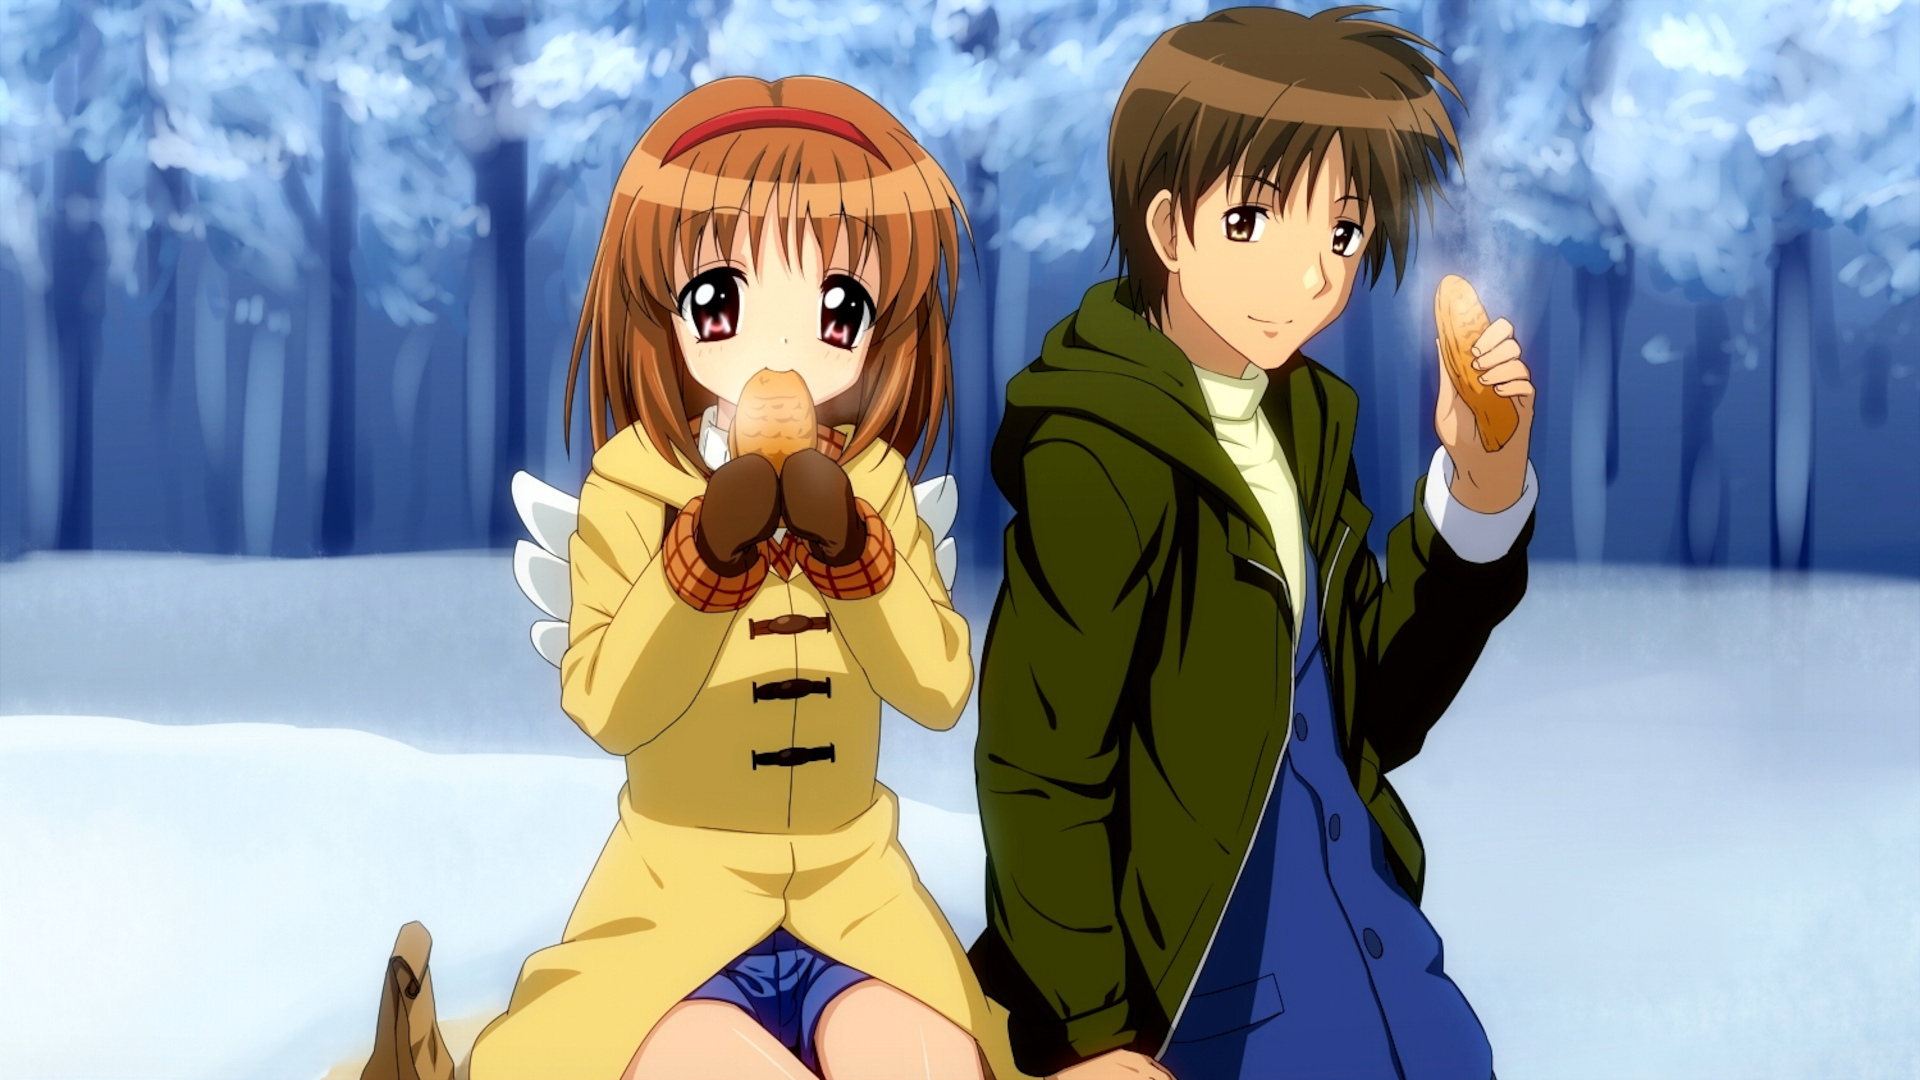 TV Show Kanon (2006) HD Wallpaper | Background Image